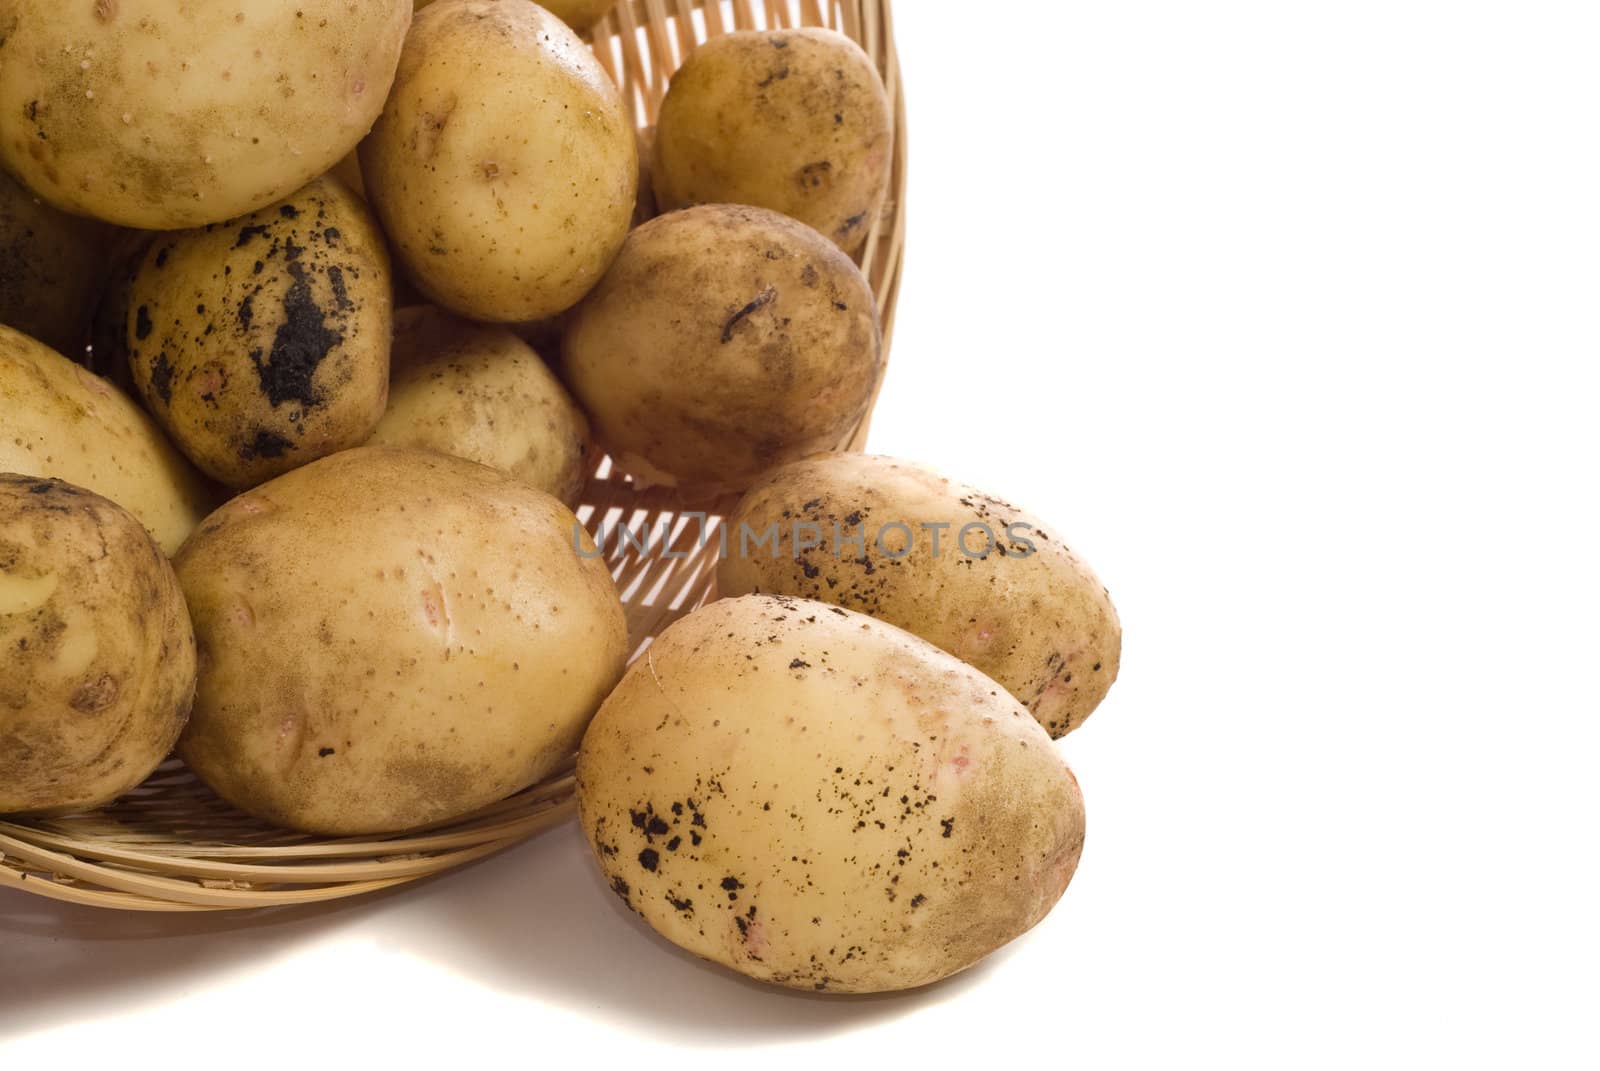 A pile of garden potatoes shot on a white background